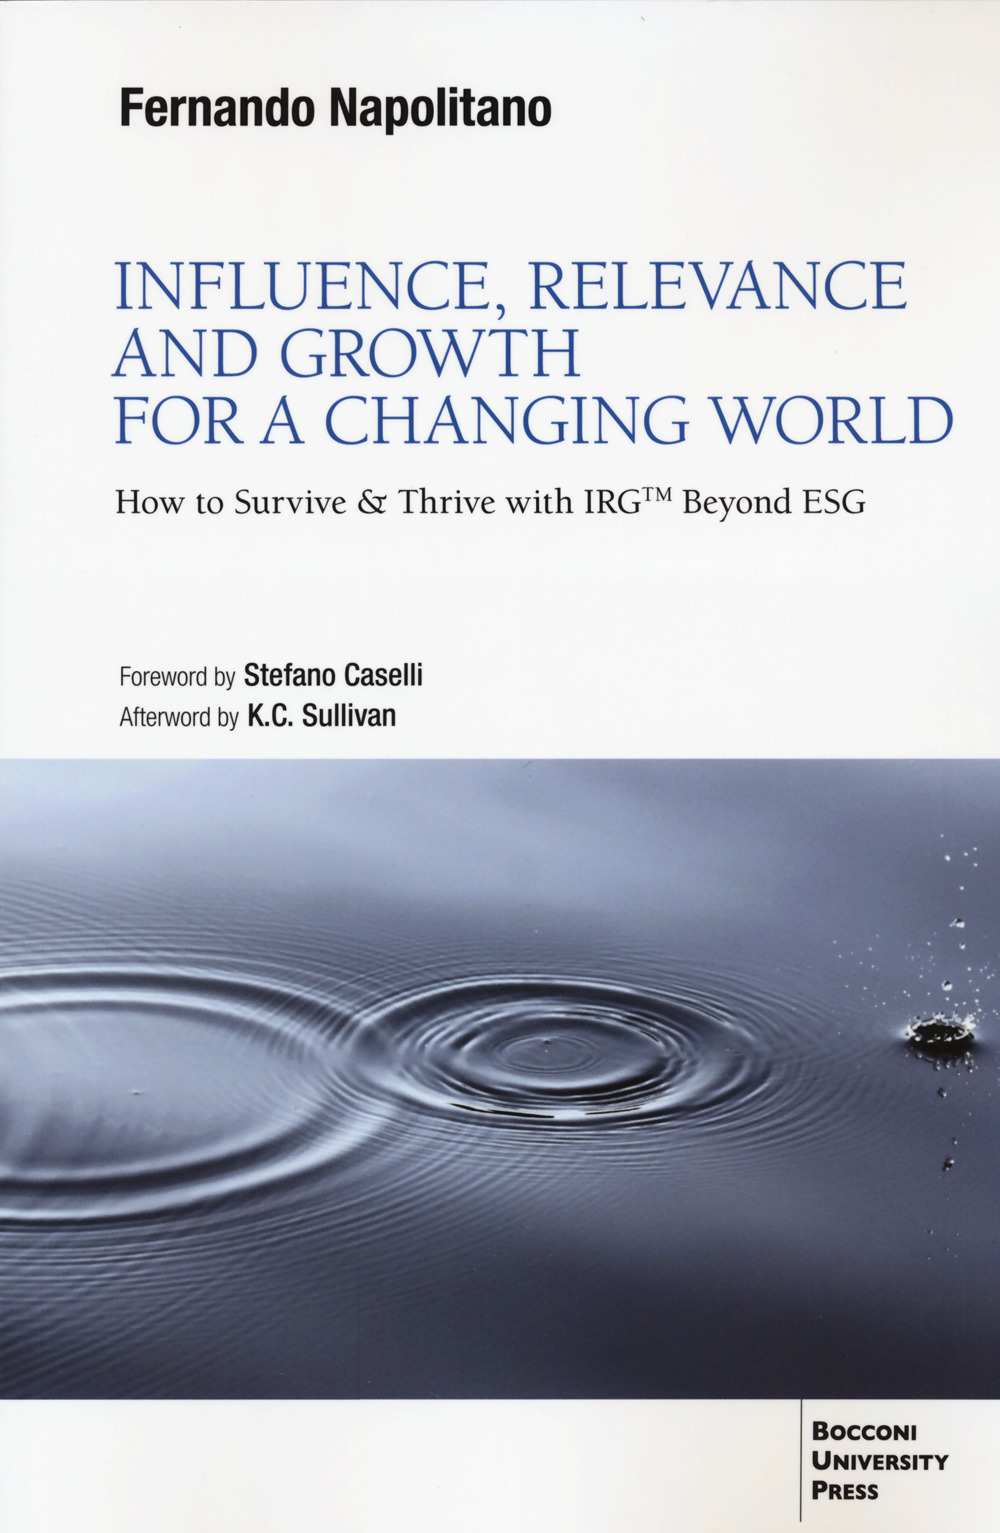 Influence, relevance and growth for a changing world. How to survive & thrive with IRGtm beyond ESG